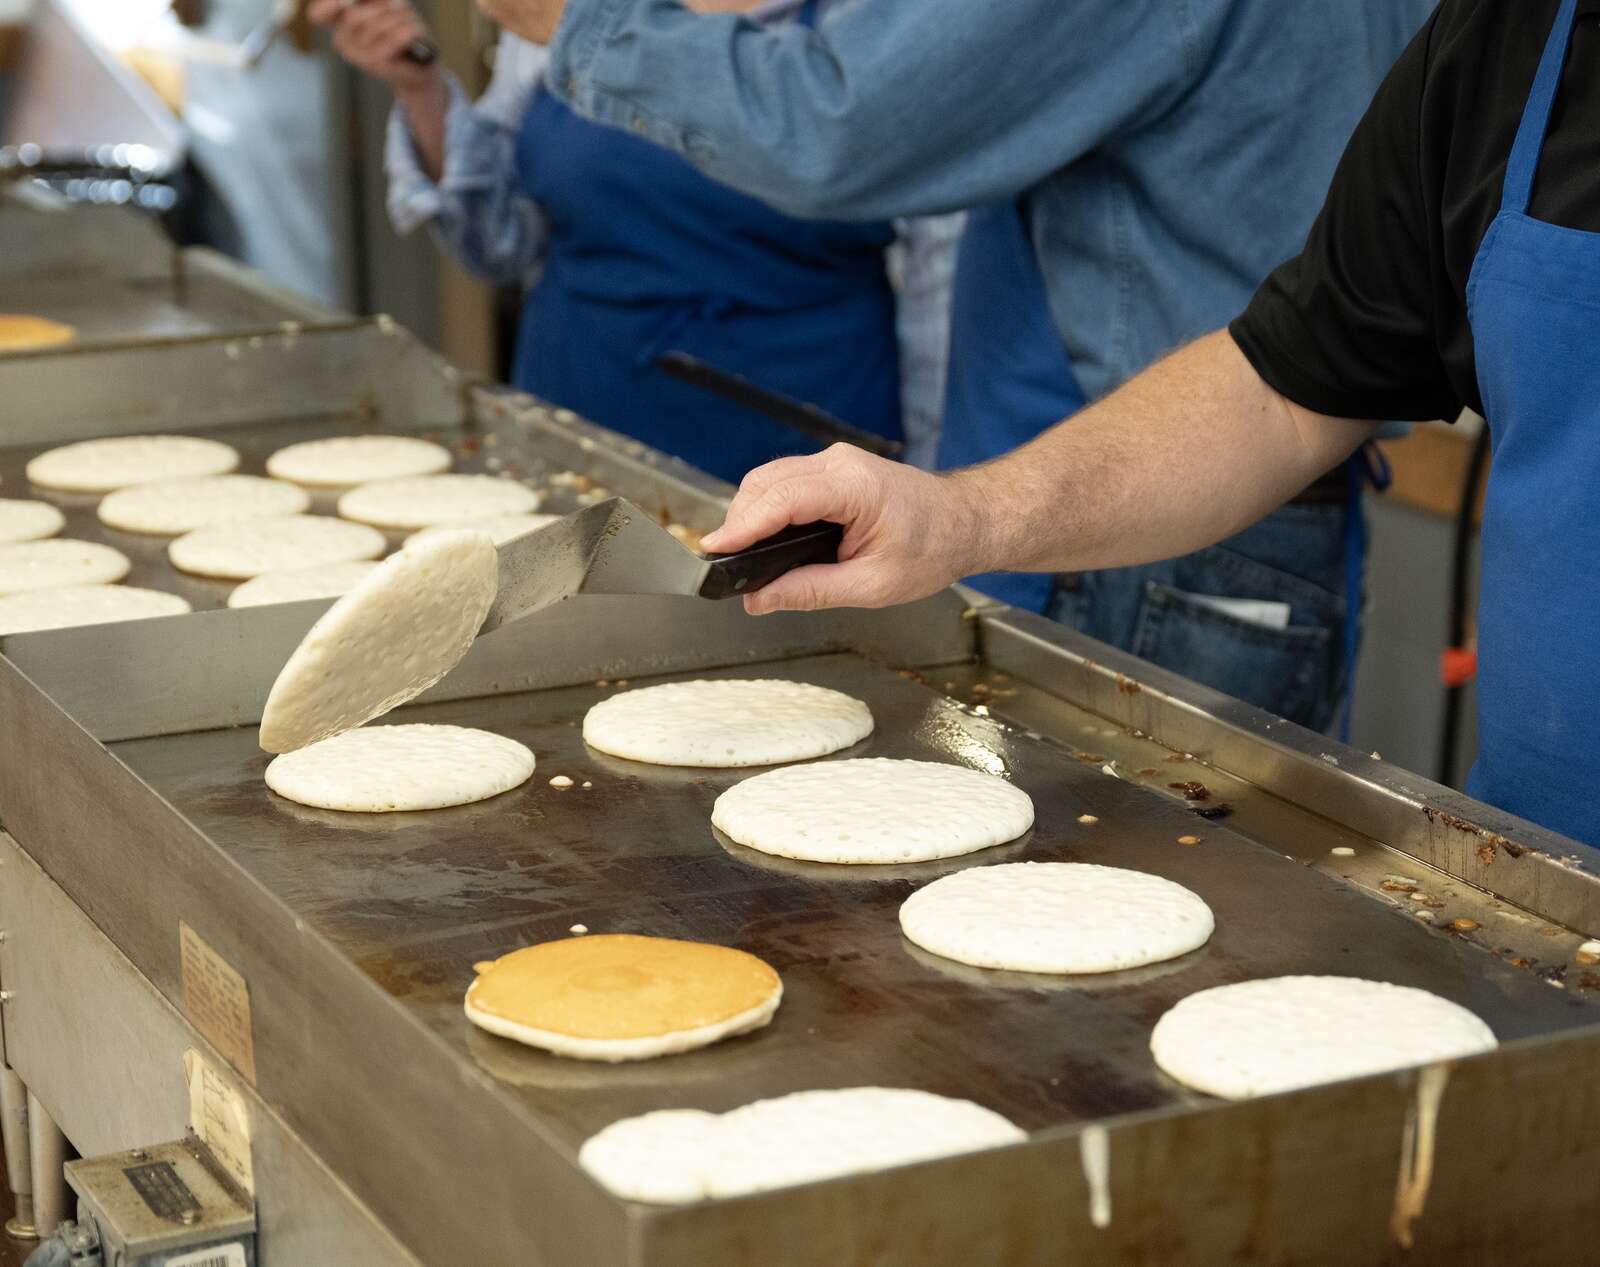 A steady flow of pancakes sizzle on the griddle